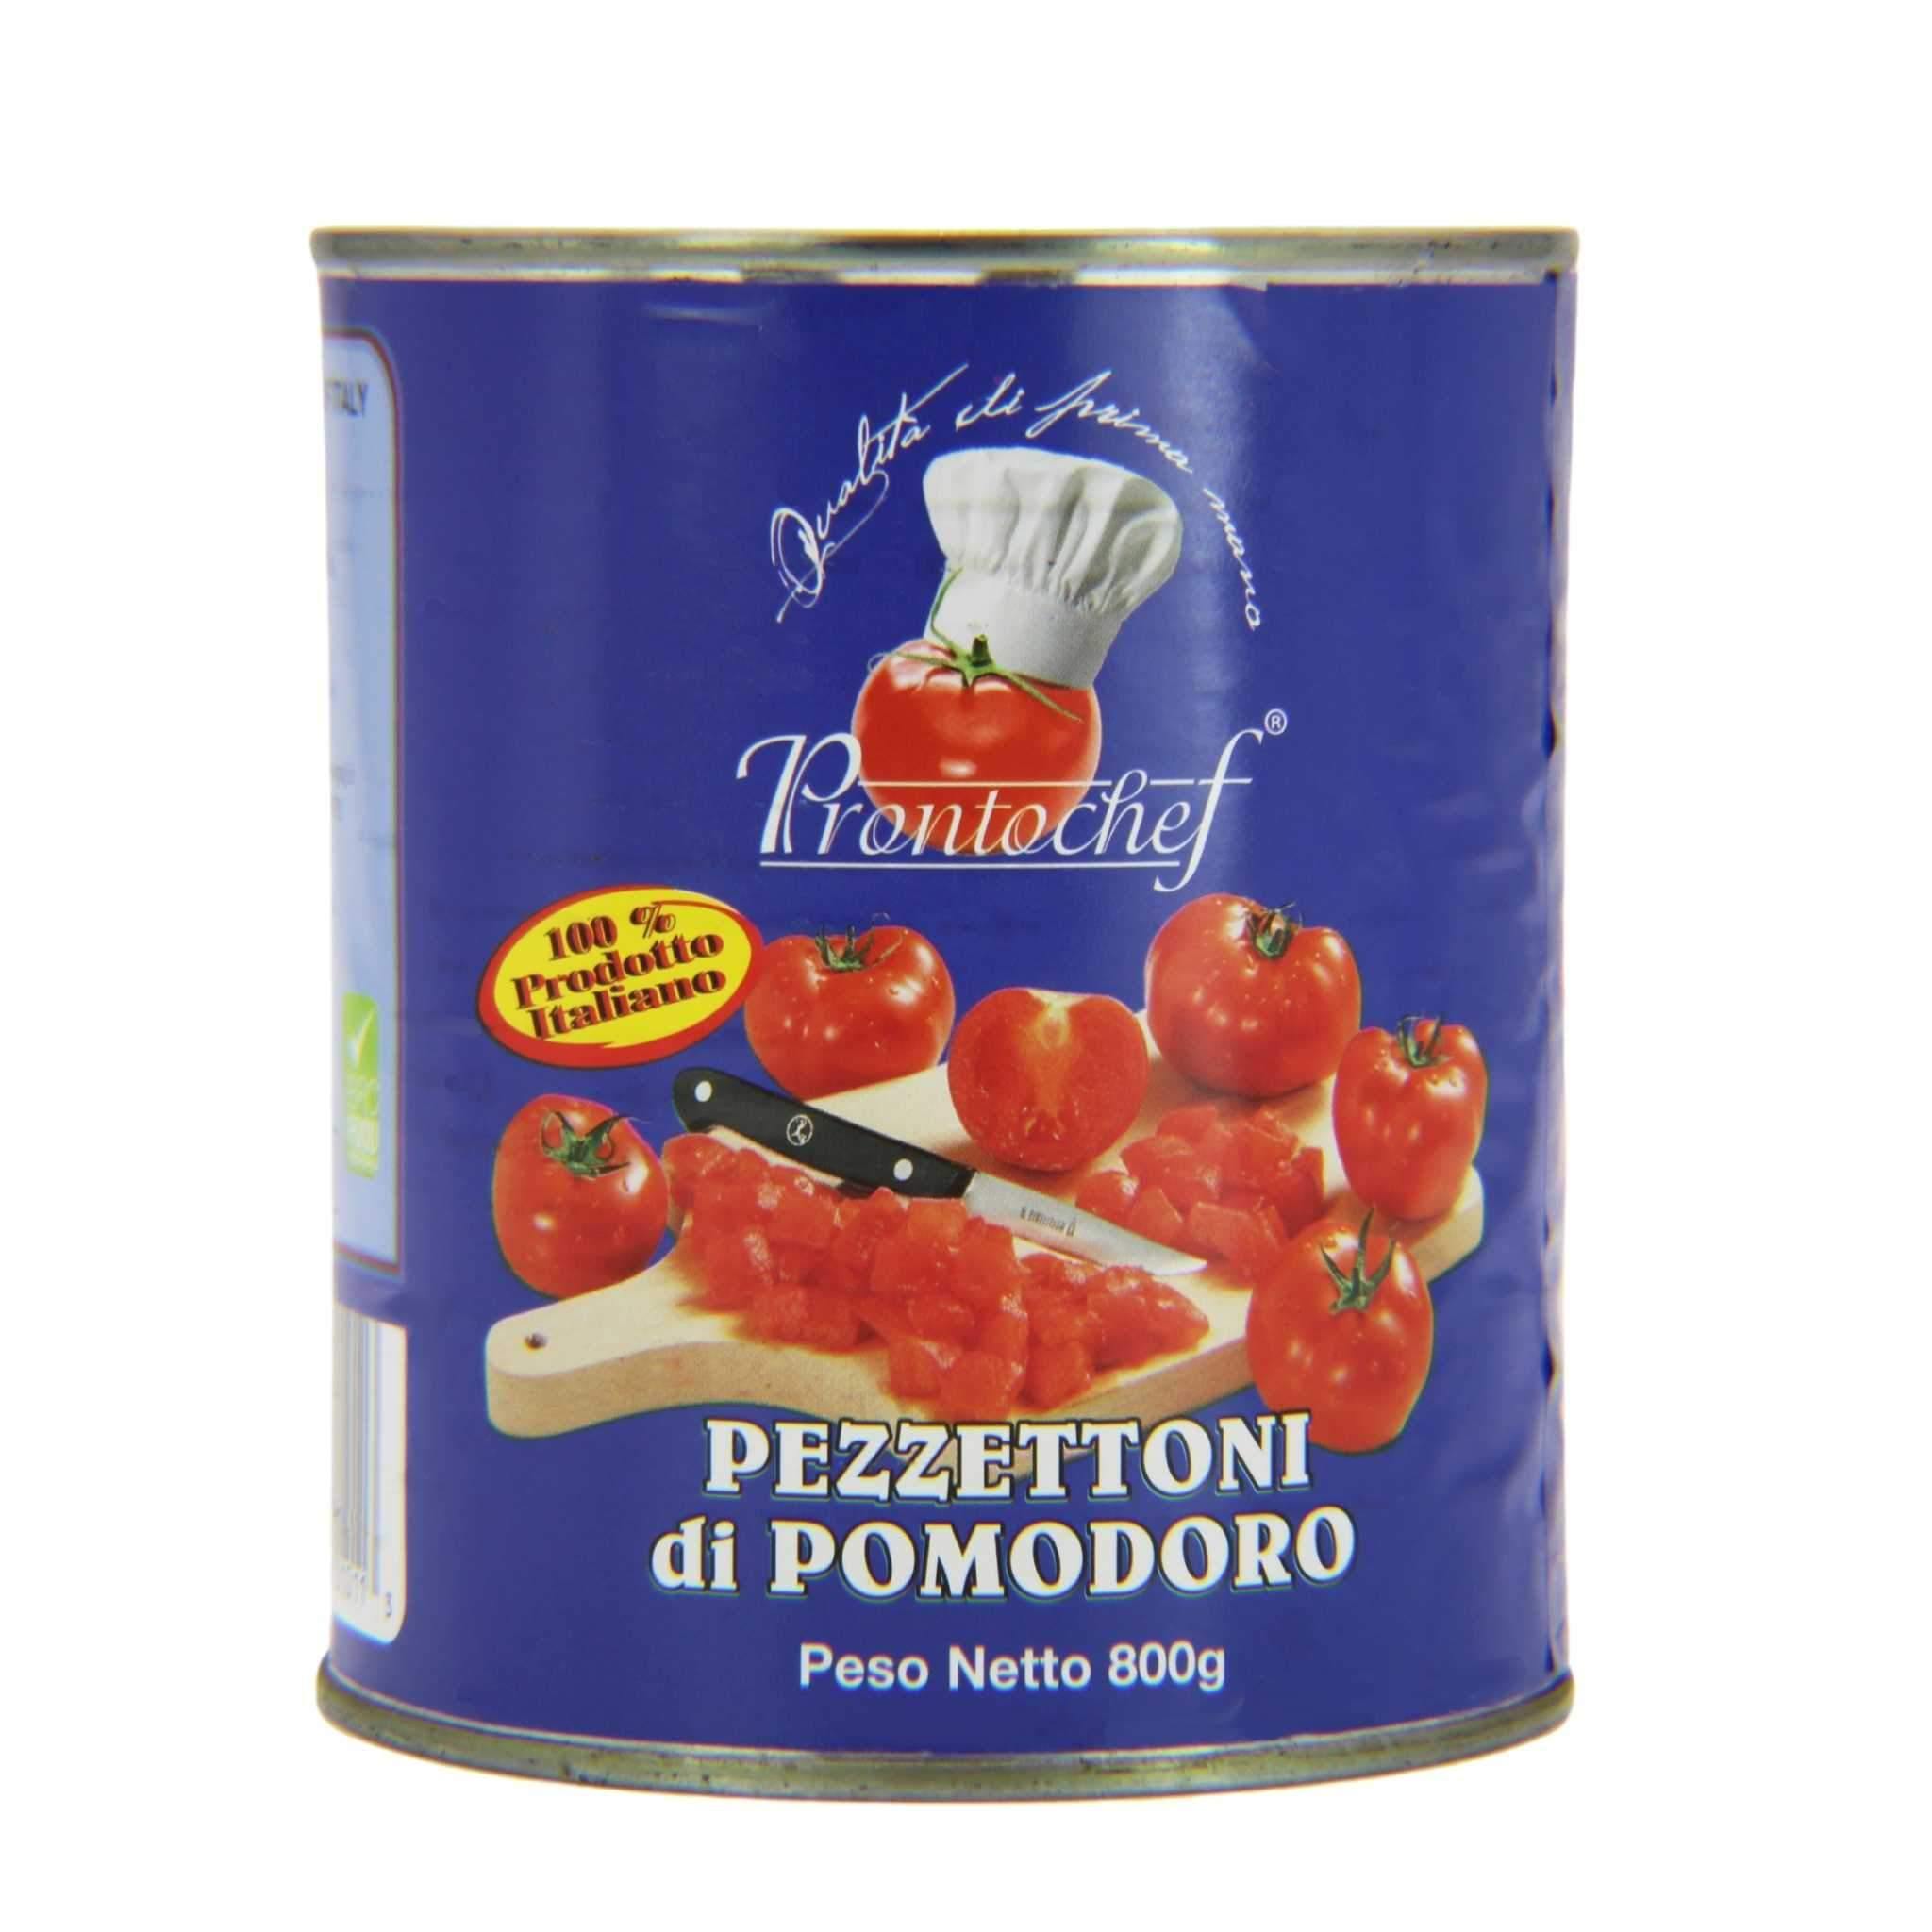 ProntoChef Diced Tomatoes 28 oz. can. - Wholesale Italian Food